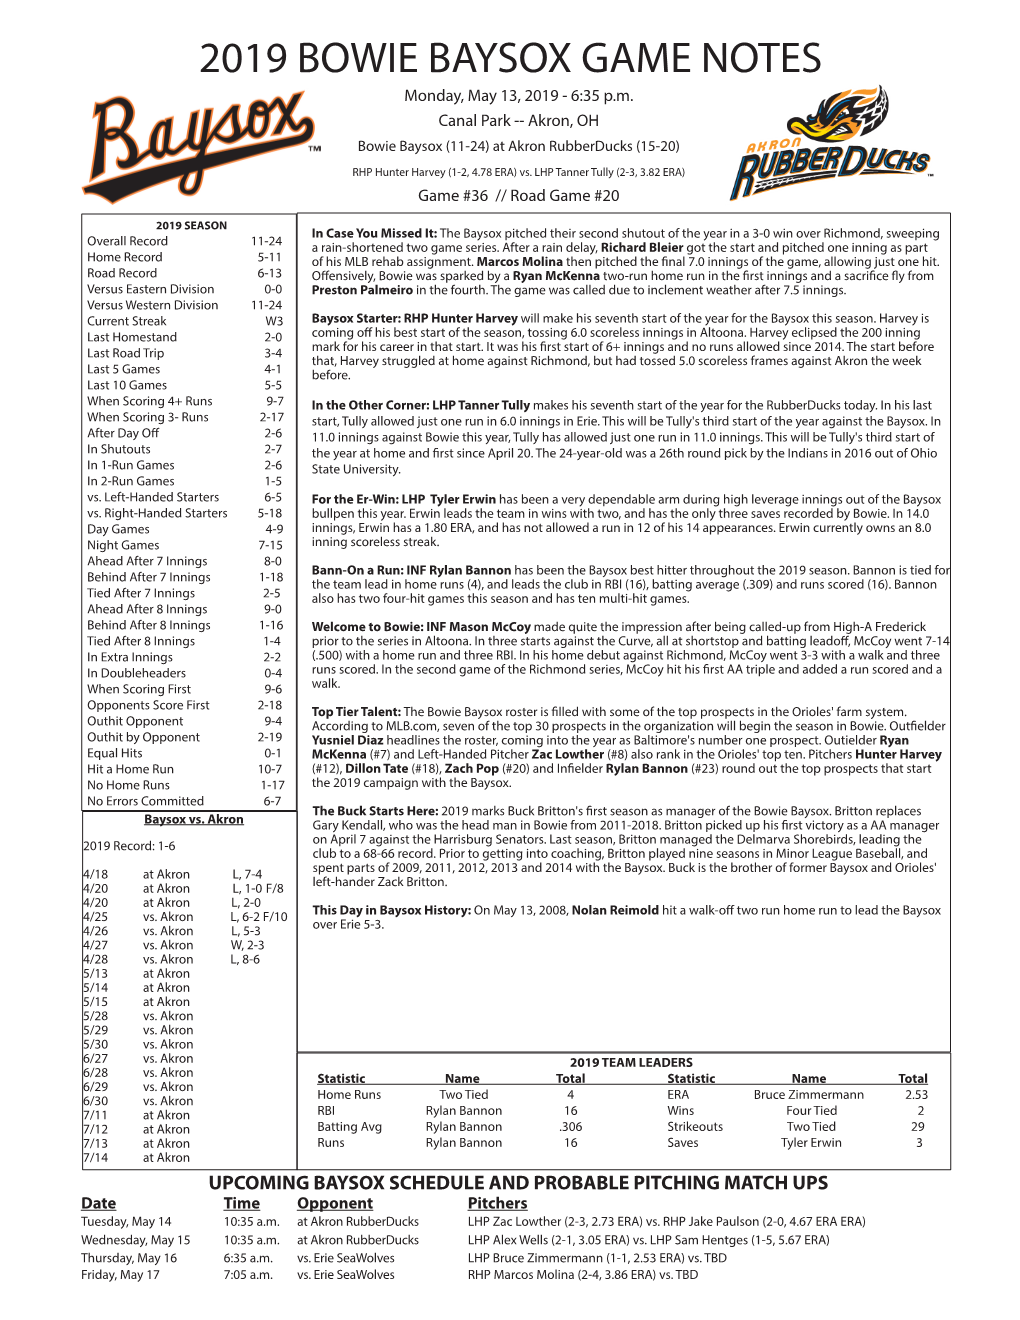 2019 BOWIE BAYSOX GAME NOTES Monday, May 13, 2019 - 6:35 P.M